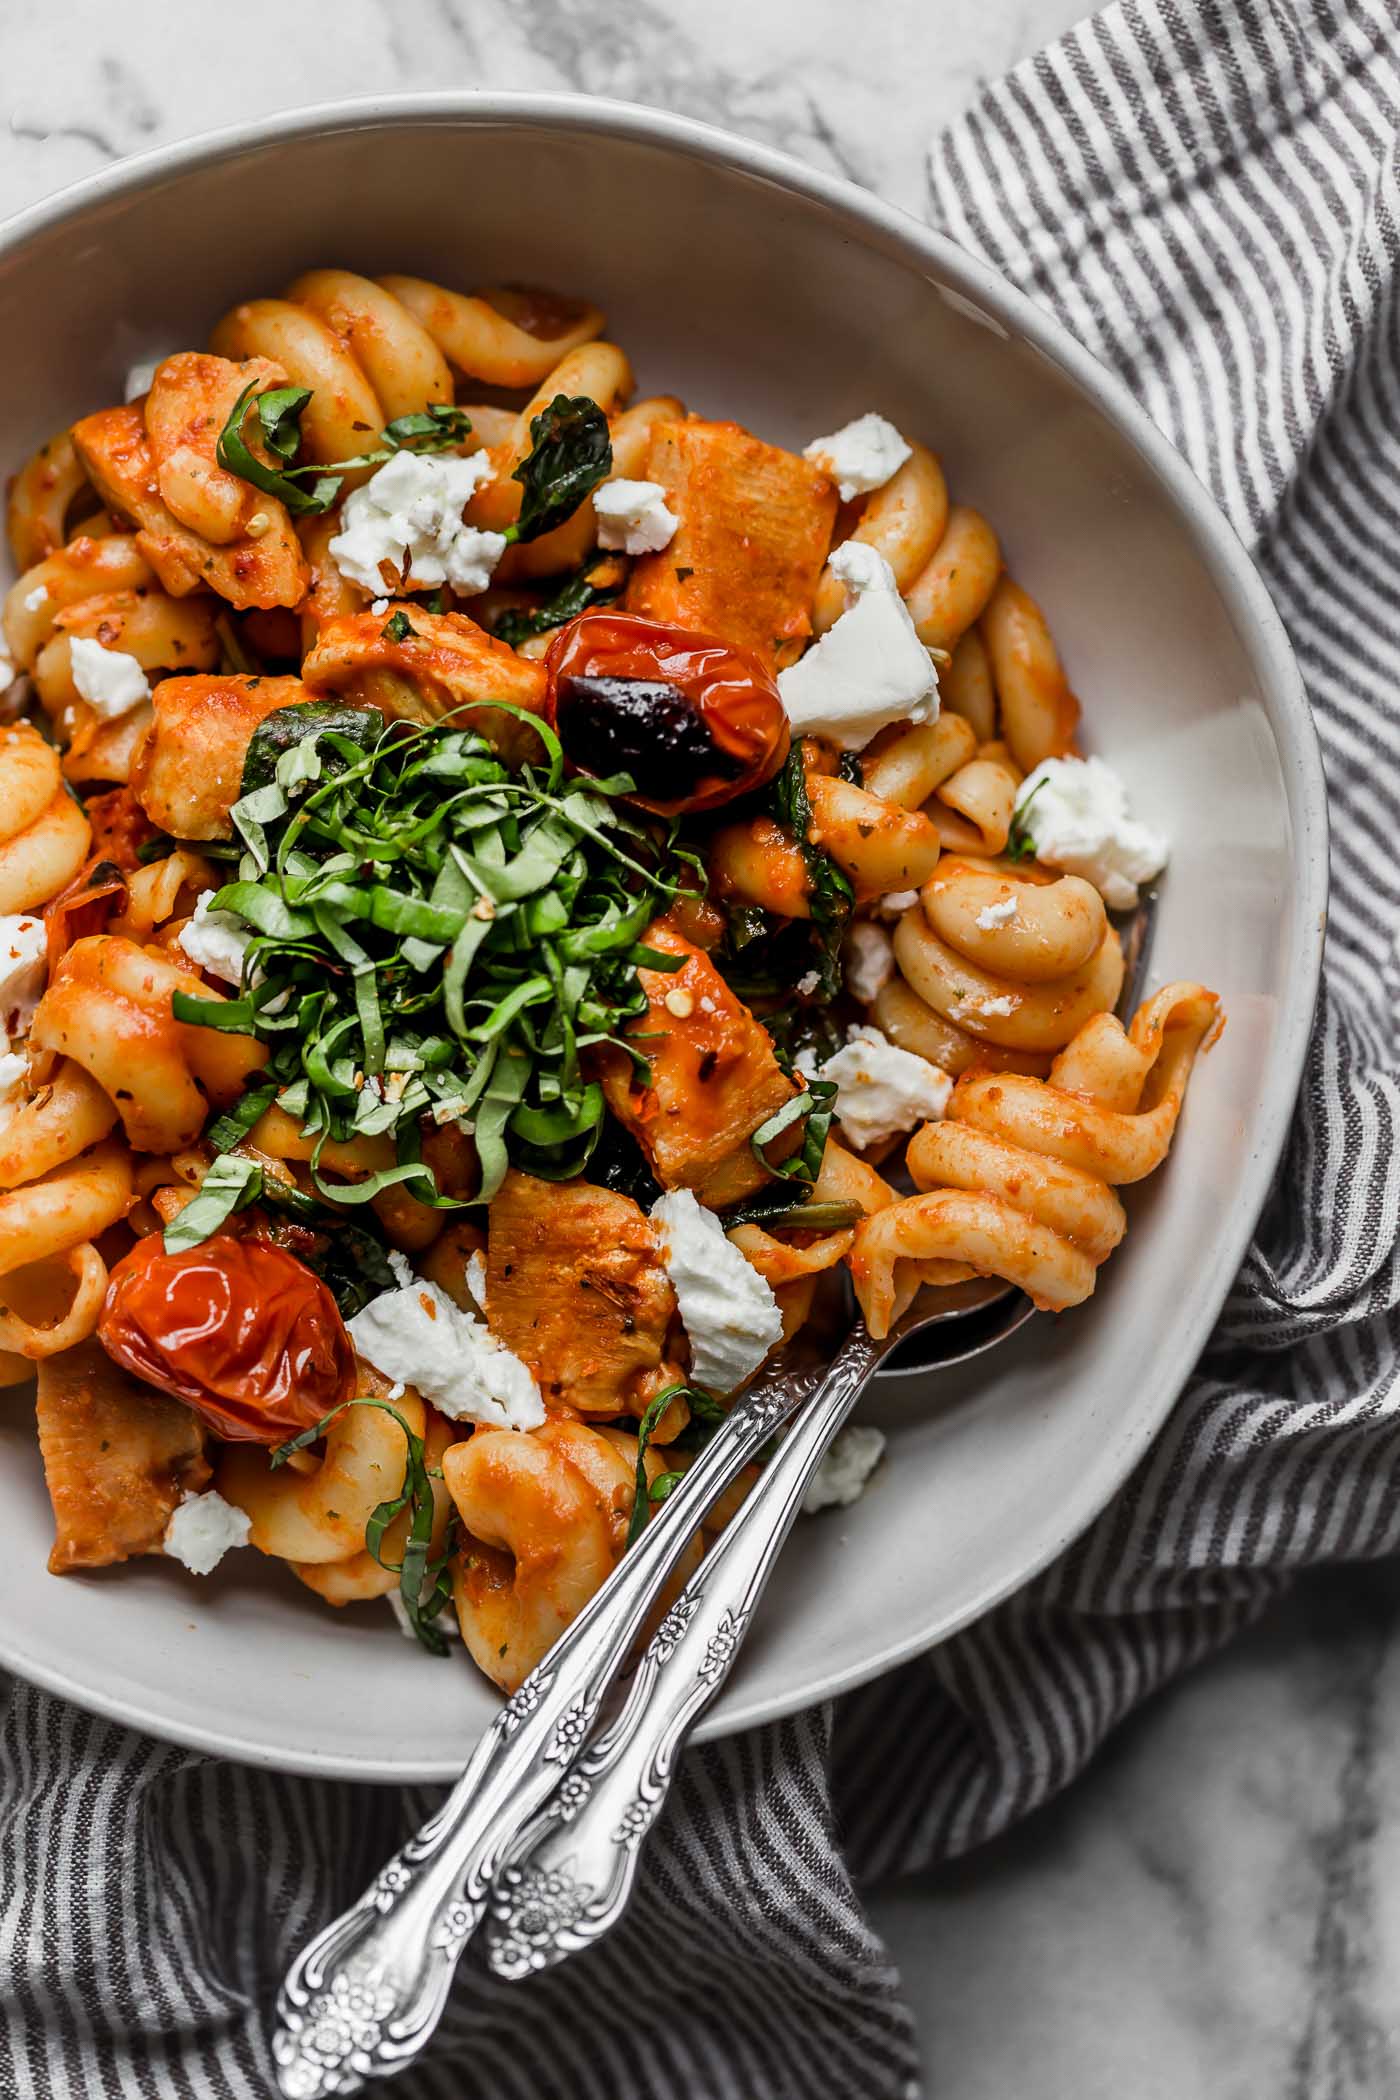 date night pasta pomodoro with chicken & goat cheese is the perfect easy pasta dinner recipe! made with chicken, spinach, goat cheese, and a homemade roasted red pepper pomodoro sauce, this pasta pomodoro with chicken & goat cheese is on your table in 25 minutes or less, tastes totally fresh, & is perfect for date night! #playswellwithbutter #easypastarecipe #pastapomodoro #pastadinner #italianrecipe